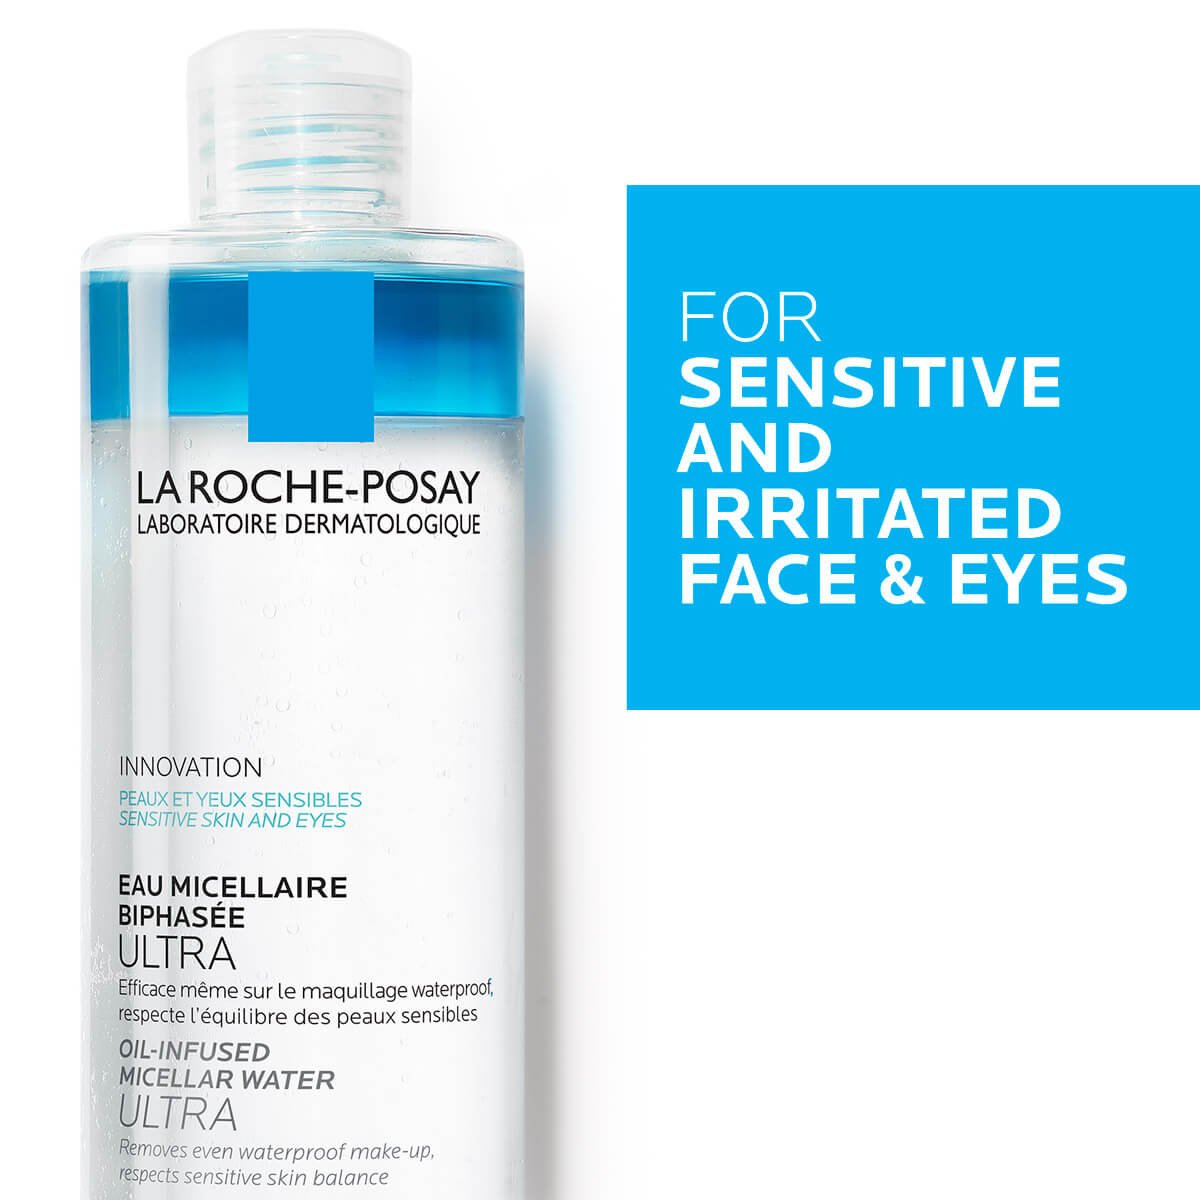 LaRochePosay-Product-Face-Physiological-Oil-Infused-Micellar-Water-Ultra-400ml-3337875725897-Zoomed-FLS